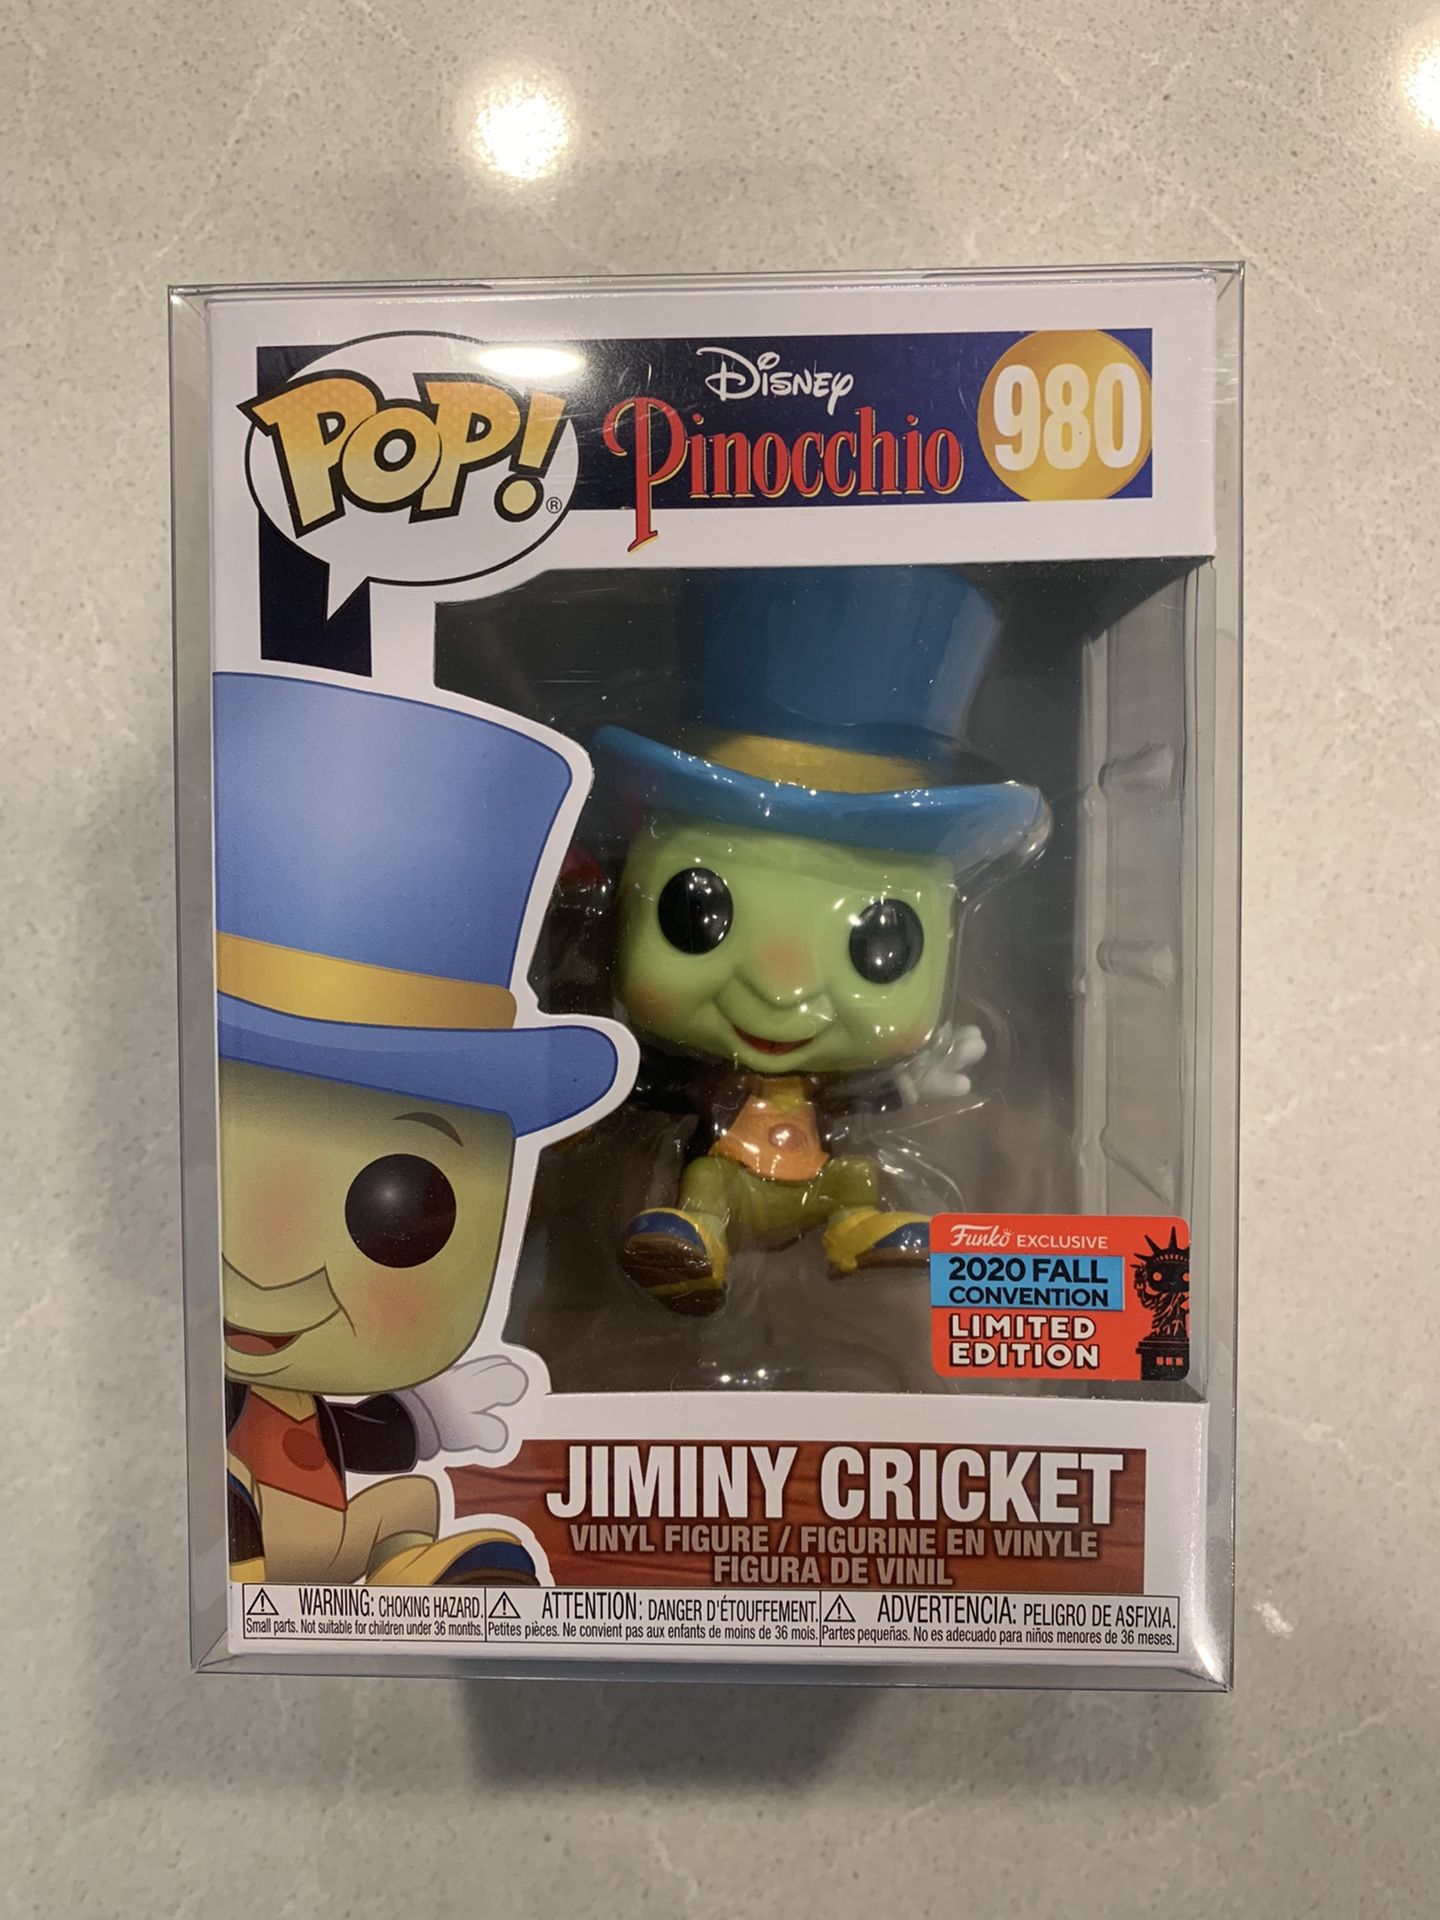 Jiminy Cricket Funko Pop **MINT IN HAND** 2020 NYCC Exclusive Pinocchio Disney 980 with protector